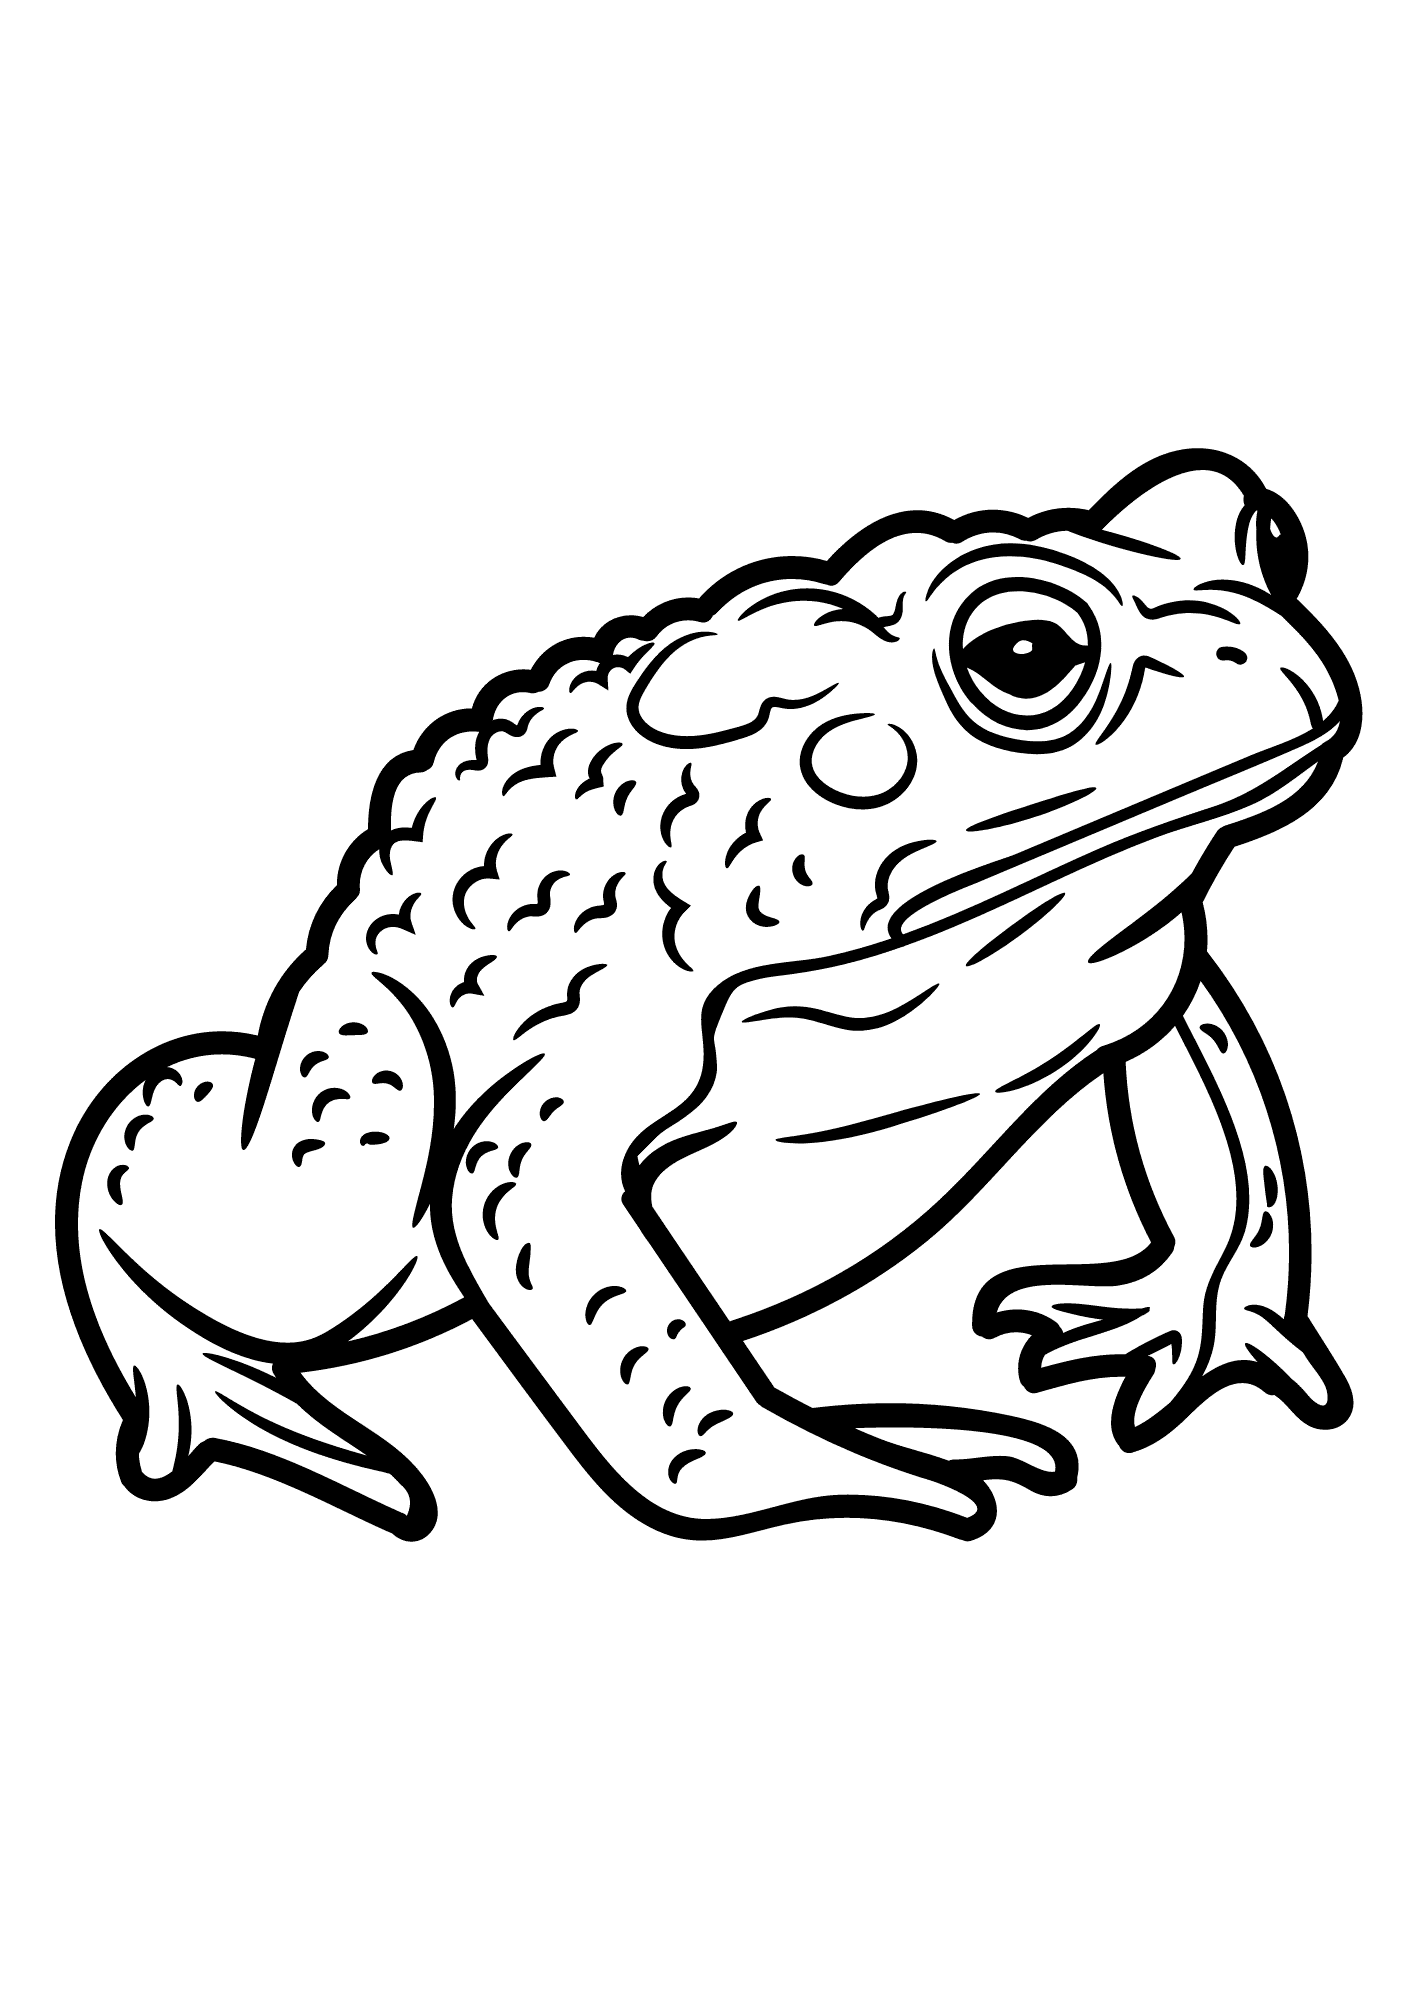 Toad Image Coloring Pages